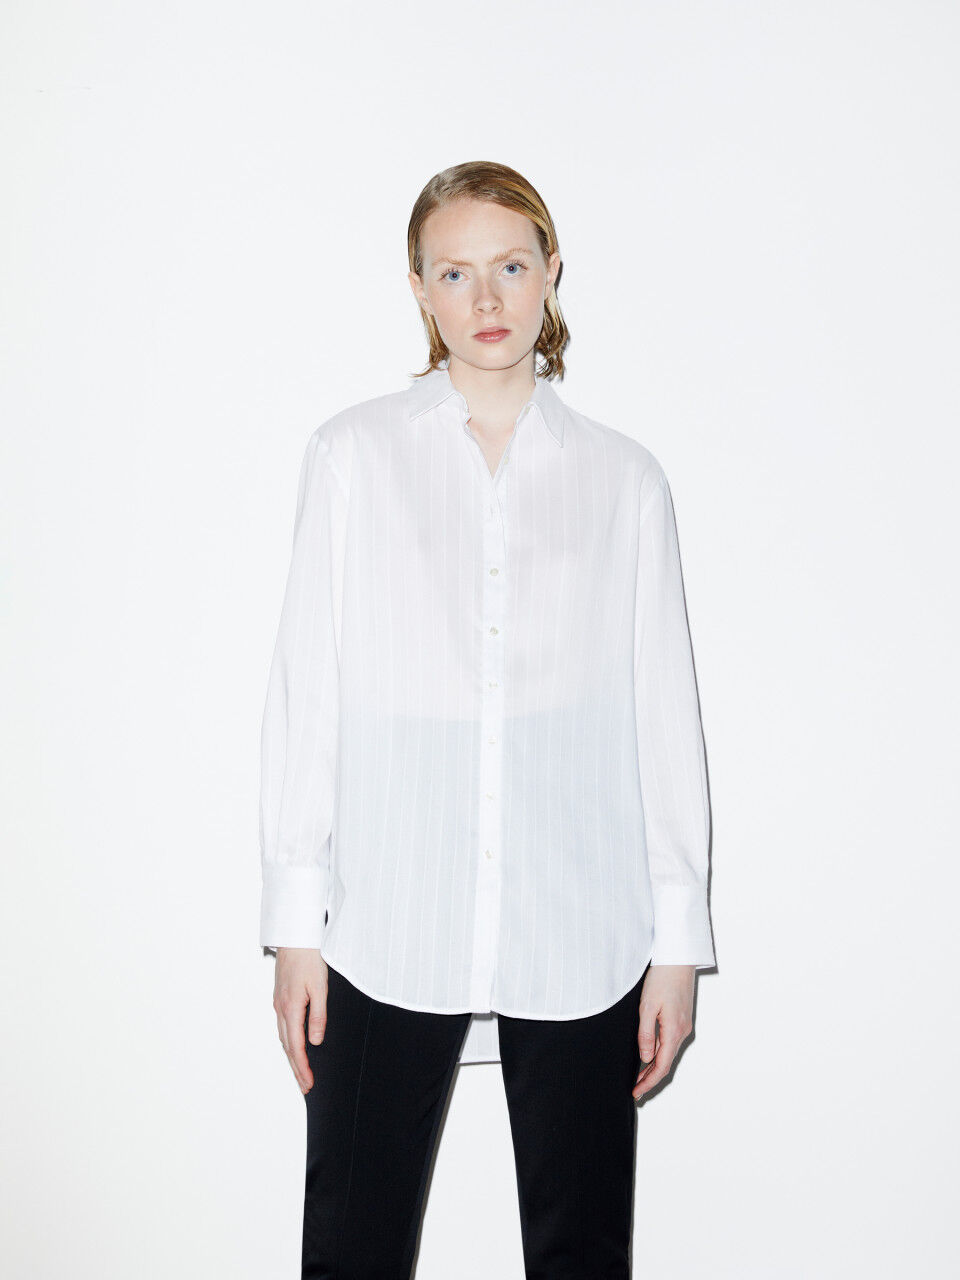 Women's Shirts and Blouses 2022 Collection | Sisley UK